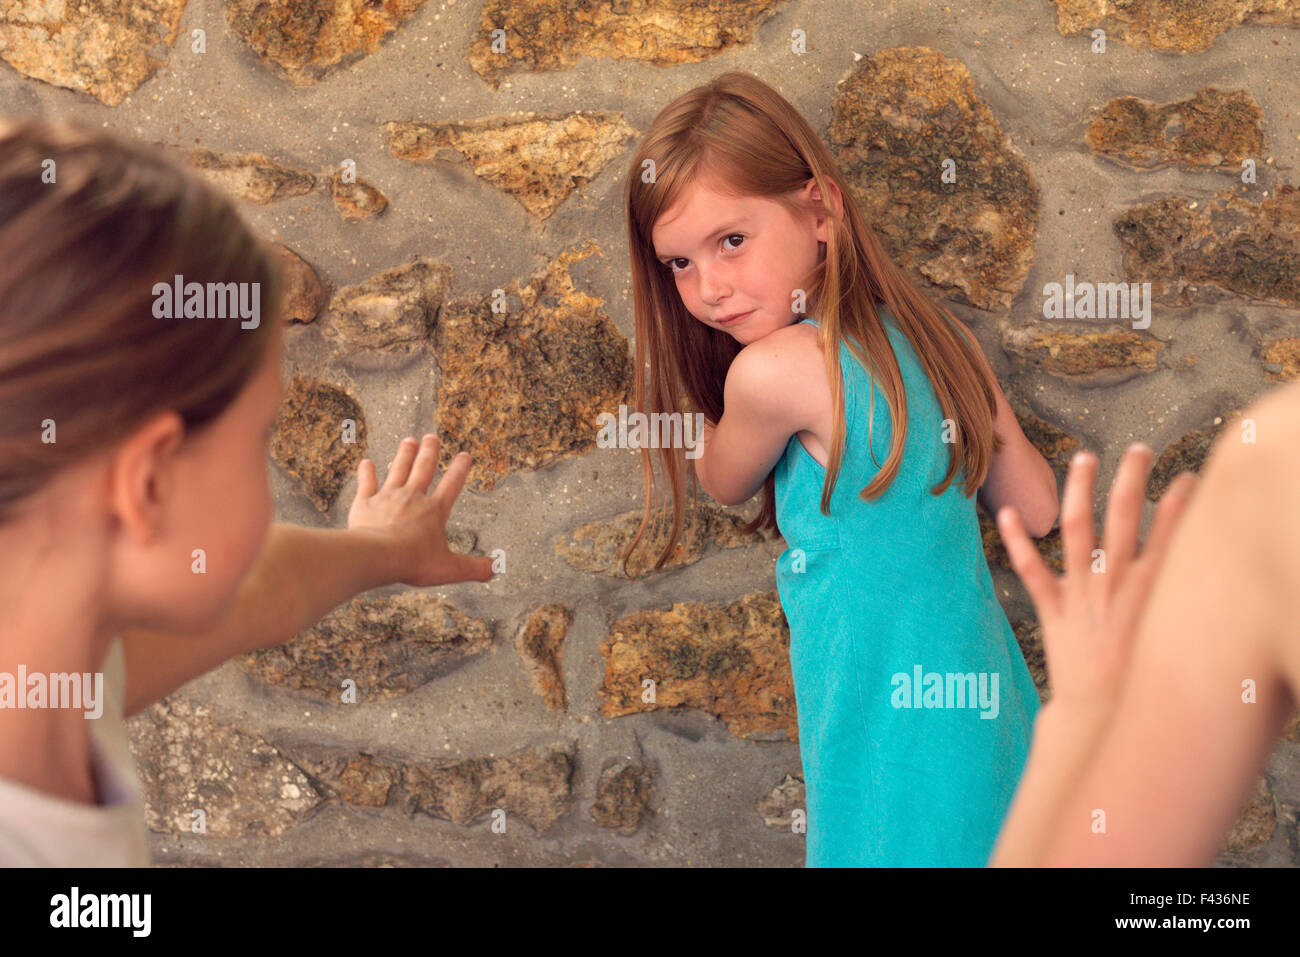 Girl playing tag with friends Stock Photo